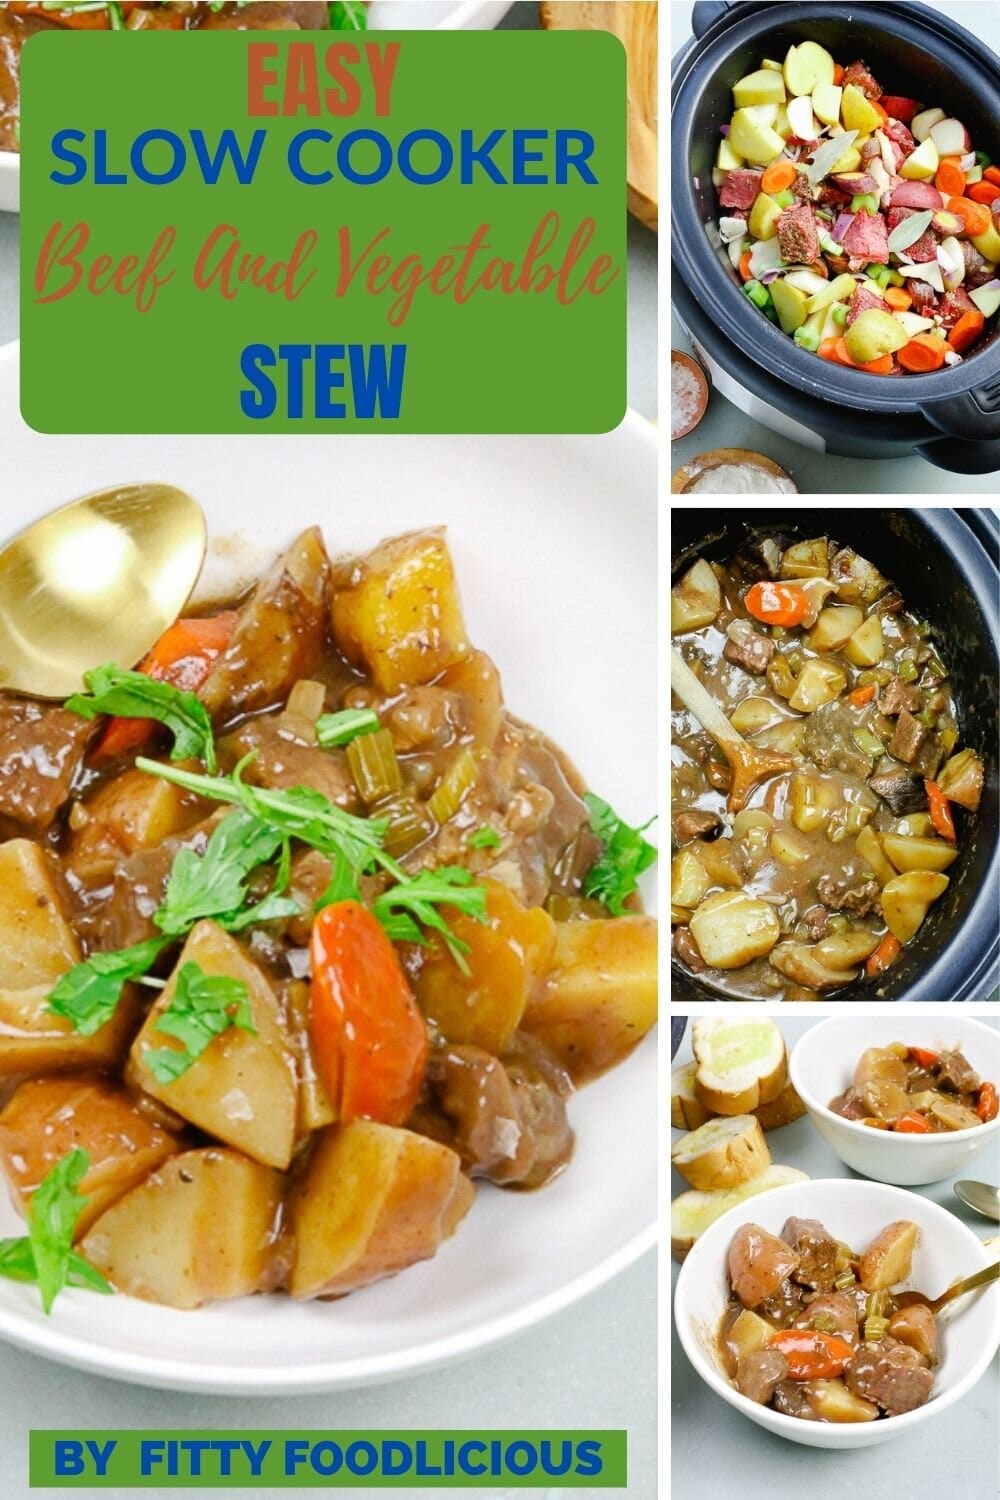 Easy Beef And Vegetable Stew, Beef Stew, Slow Cooker, Slow Cooker Beef Stew, Vegetable Stew